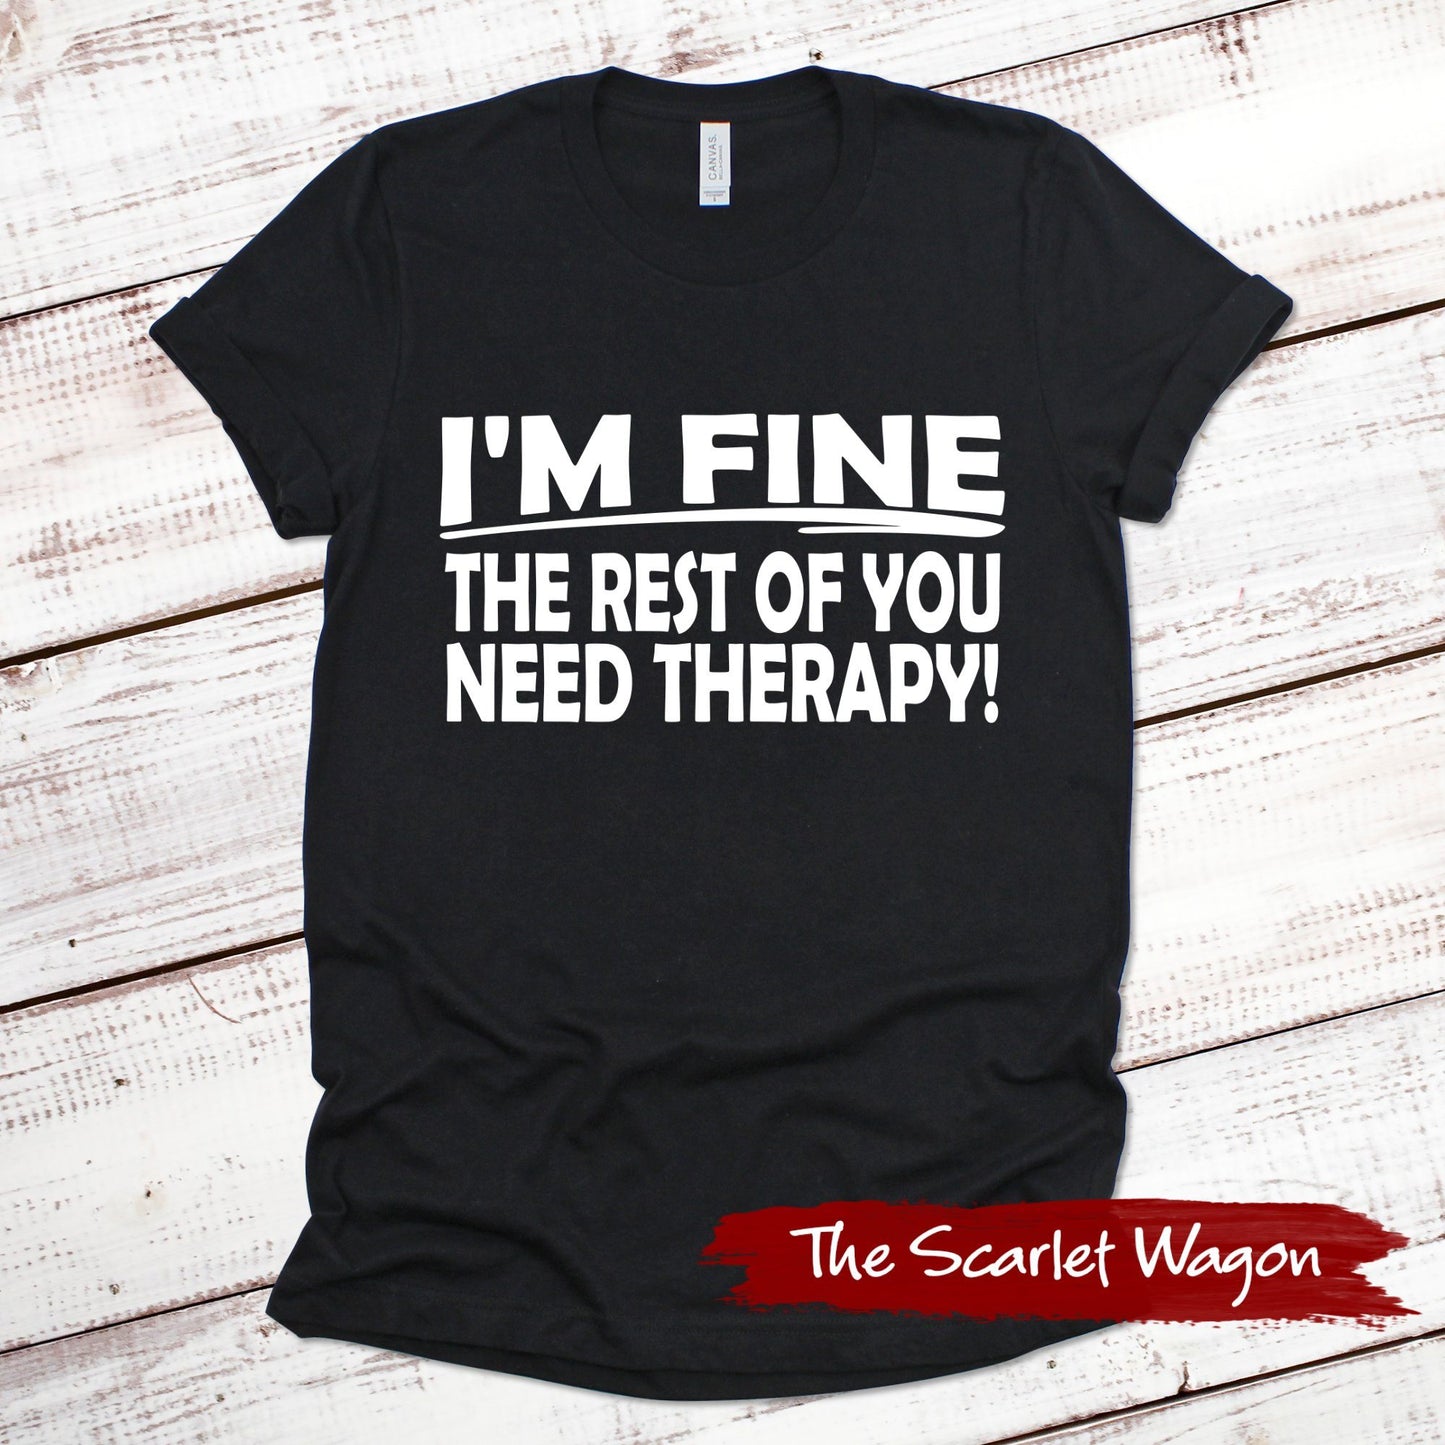 I'm Fine the Rest of You Need Therapy Funny Shirt Scarlet Wagon Black XS 